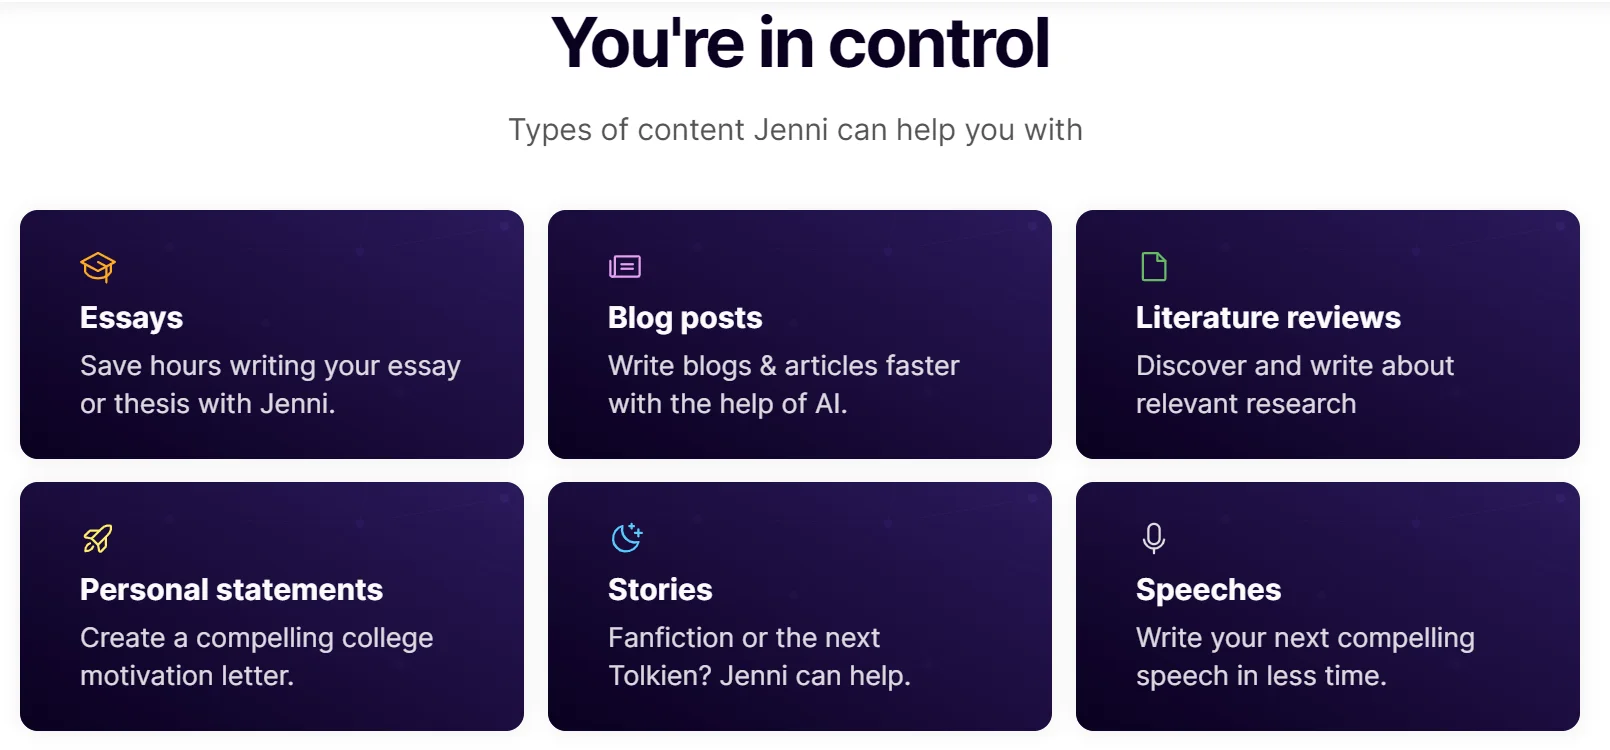 Types of Content Jenni can help you with 